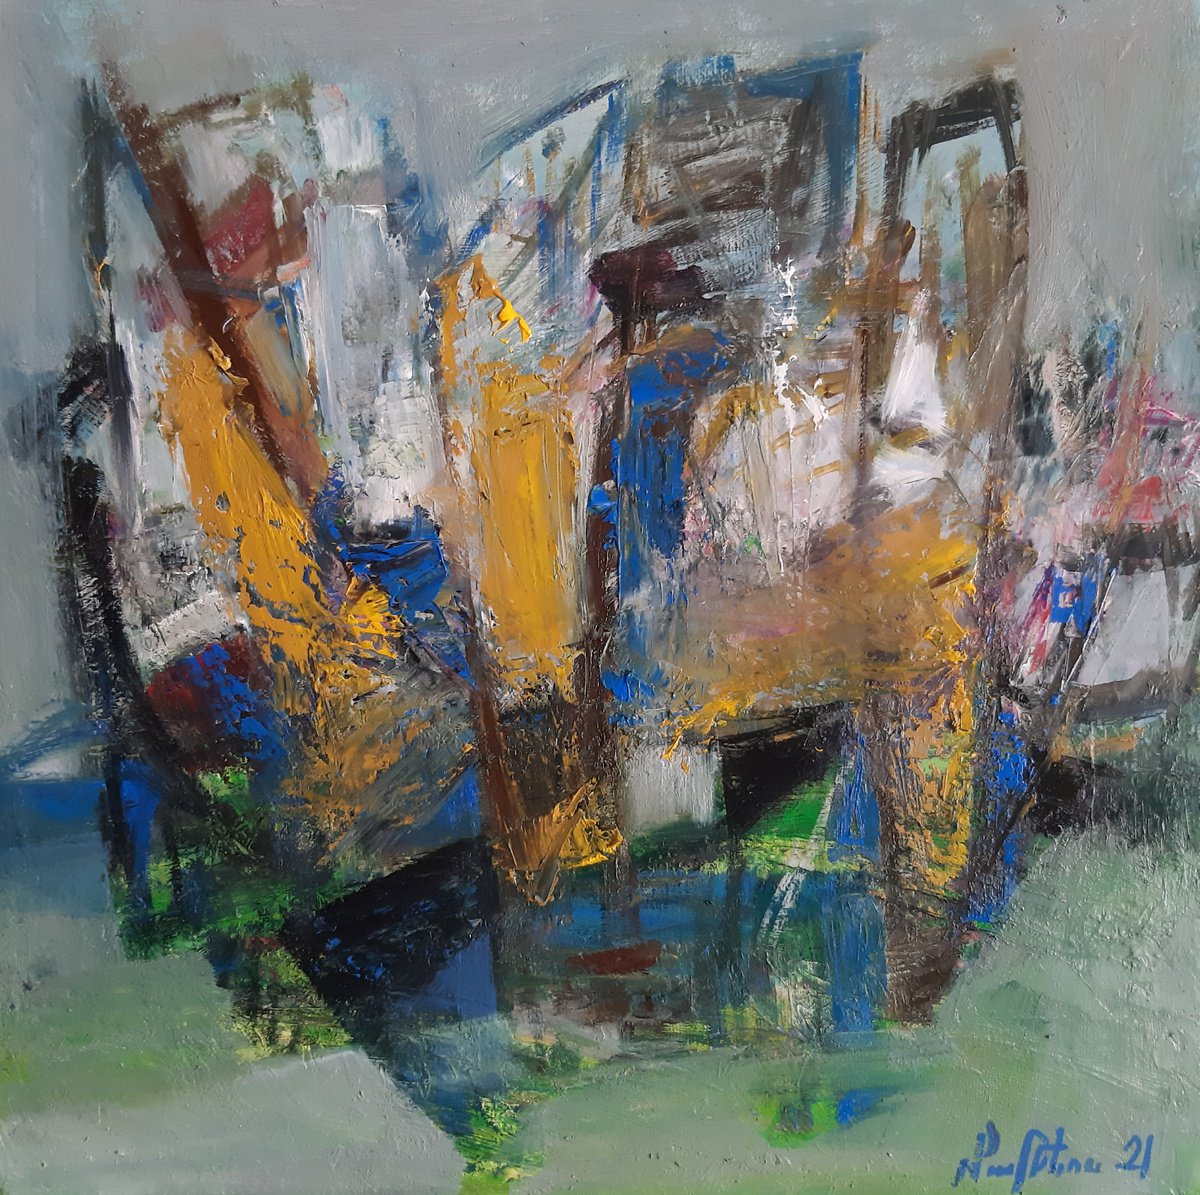 Abstract (35x35cm, oil painting, palette knife) by Matevos Sargsyan